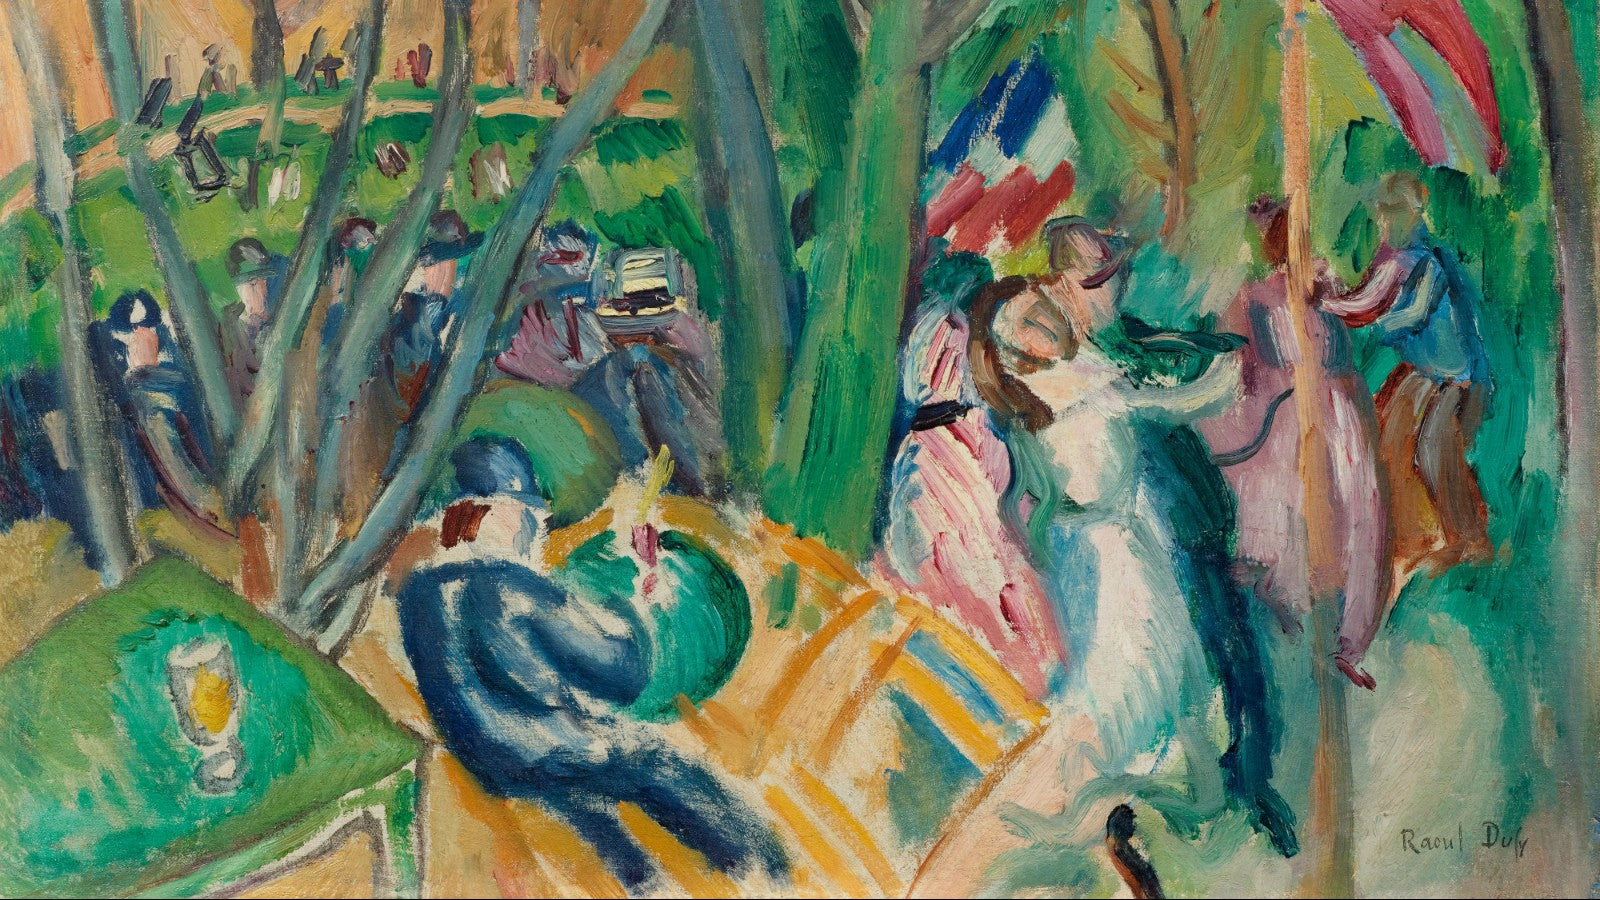 Le Bal Populaire (The Local Dance) painting by Raoul Dufy (1906)